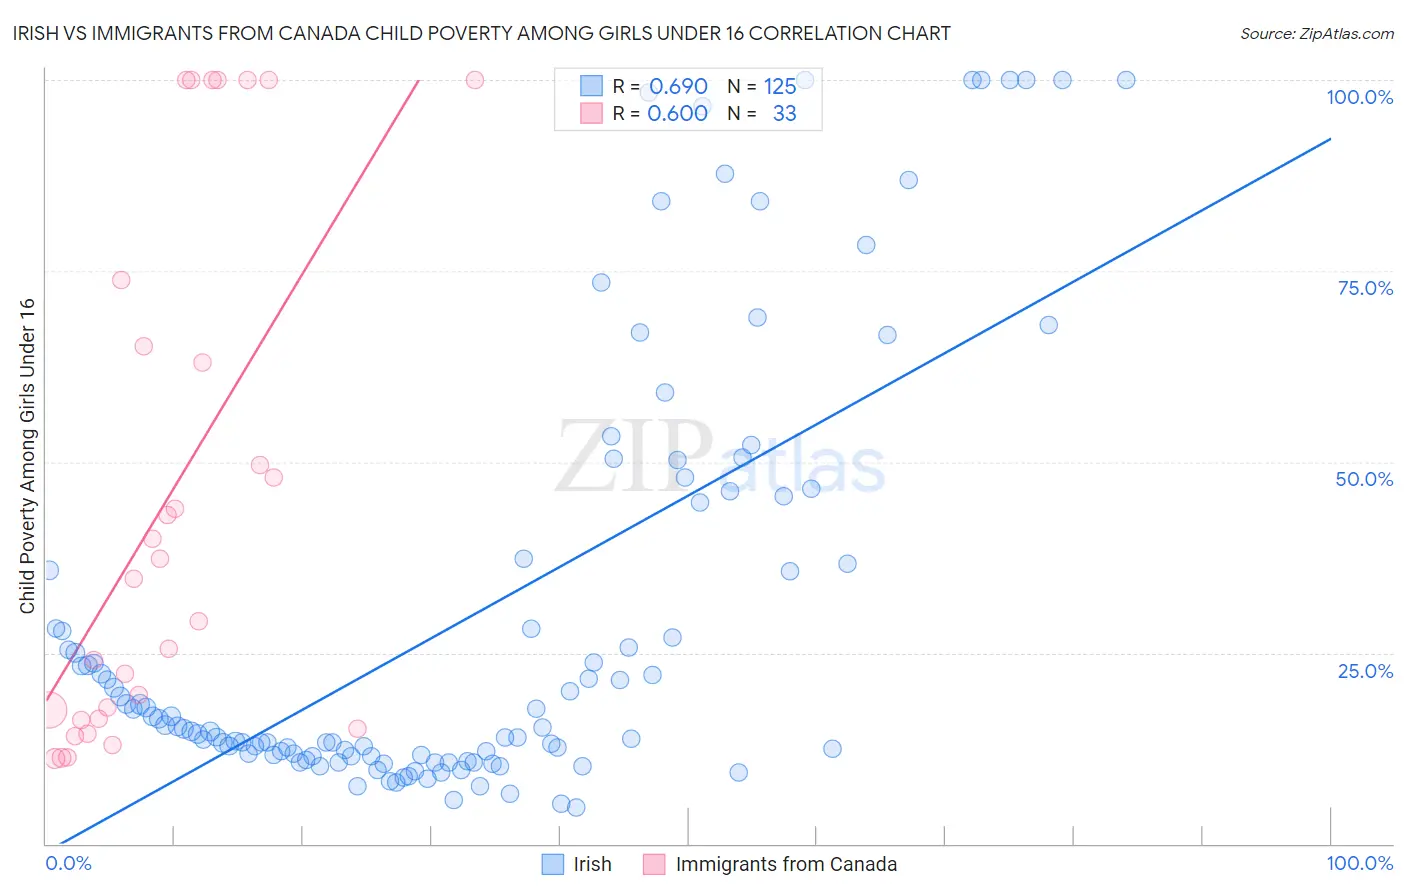 Irish vs Immigrants from Canada Child Poverty Among Girls Under 16